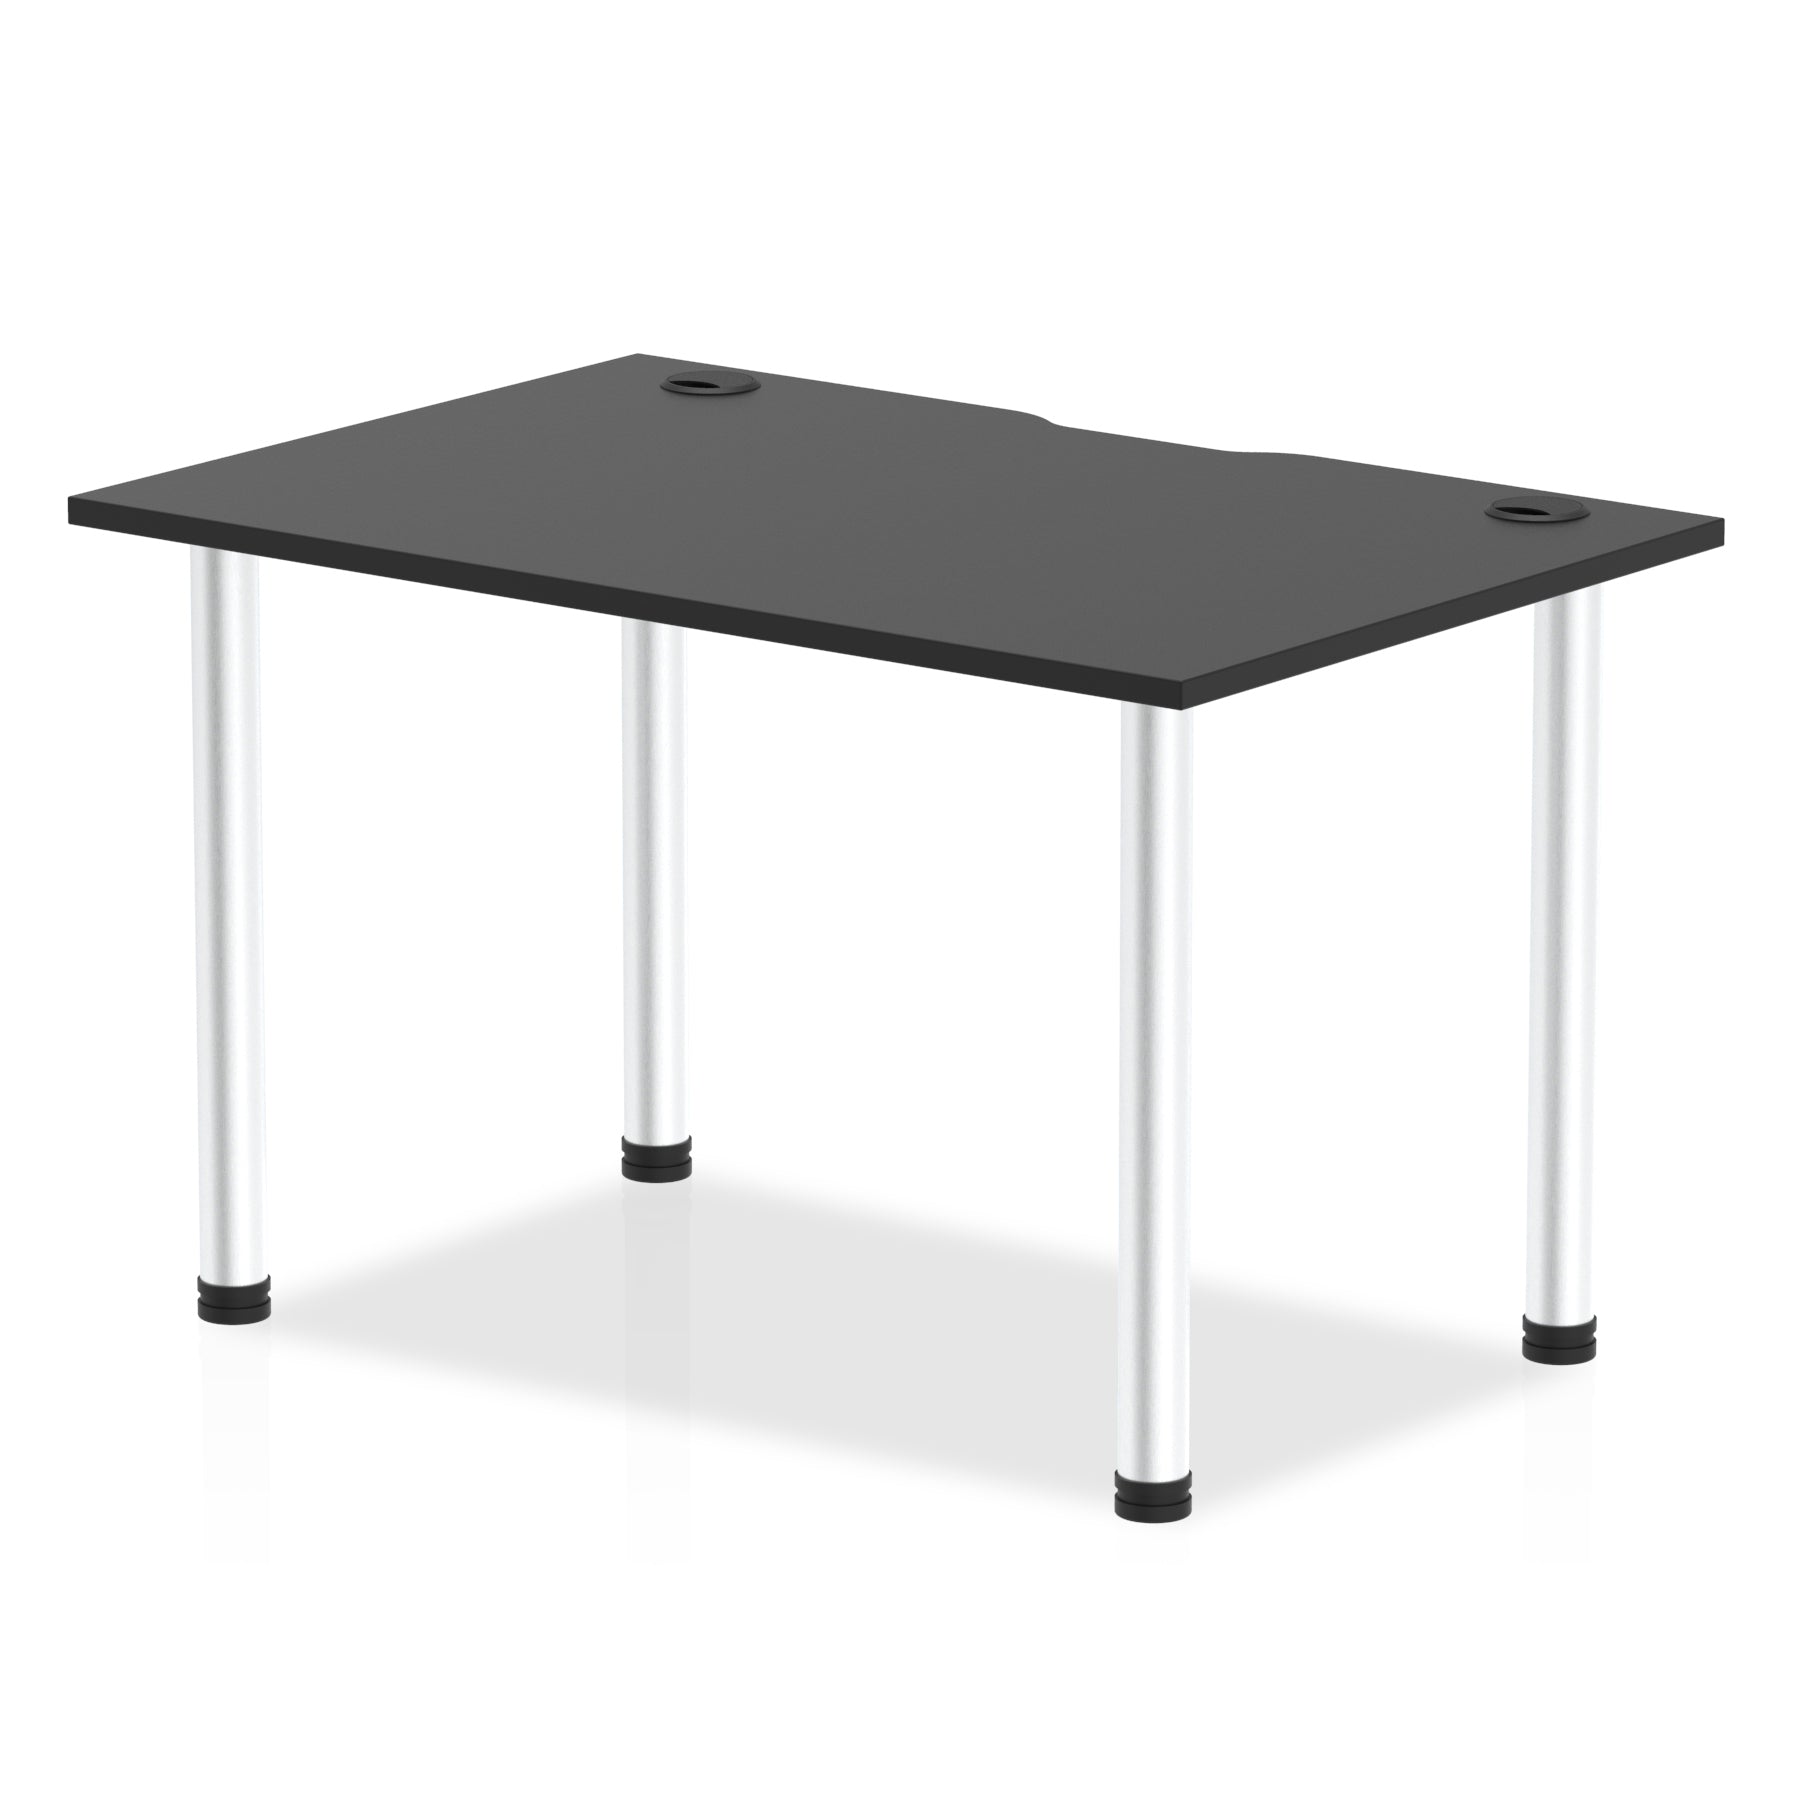 Photos - Dining Table Dynamic Office Solutions Impulse Black Series Straight Table I004203 